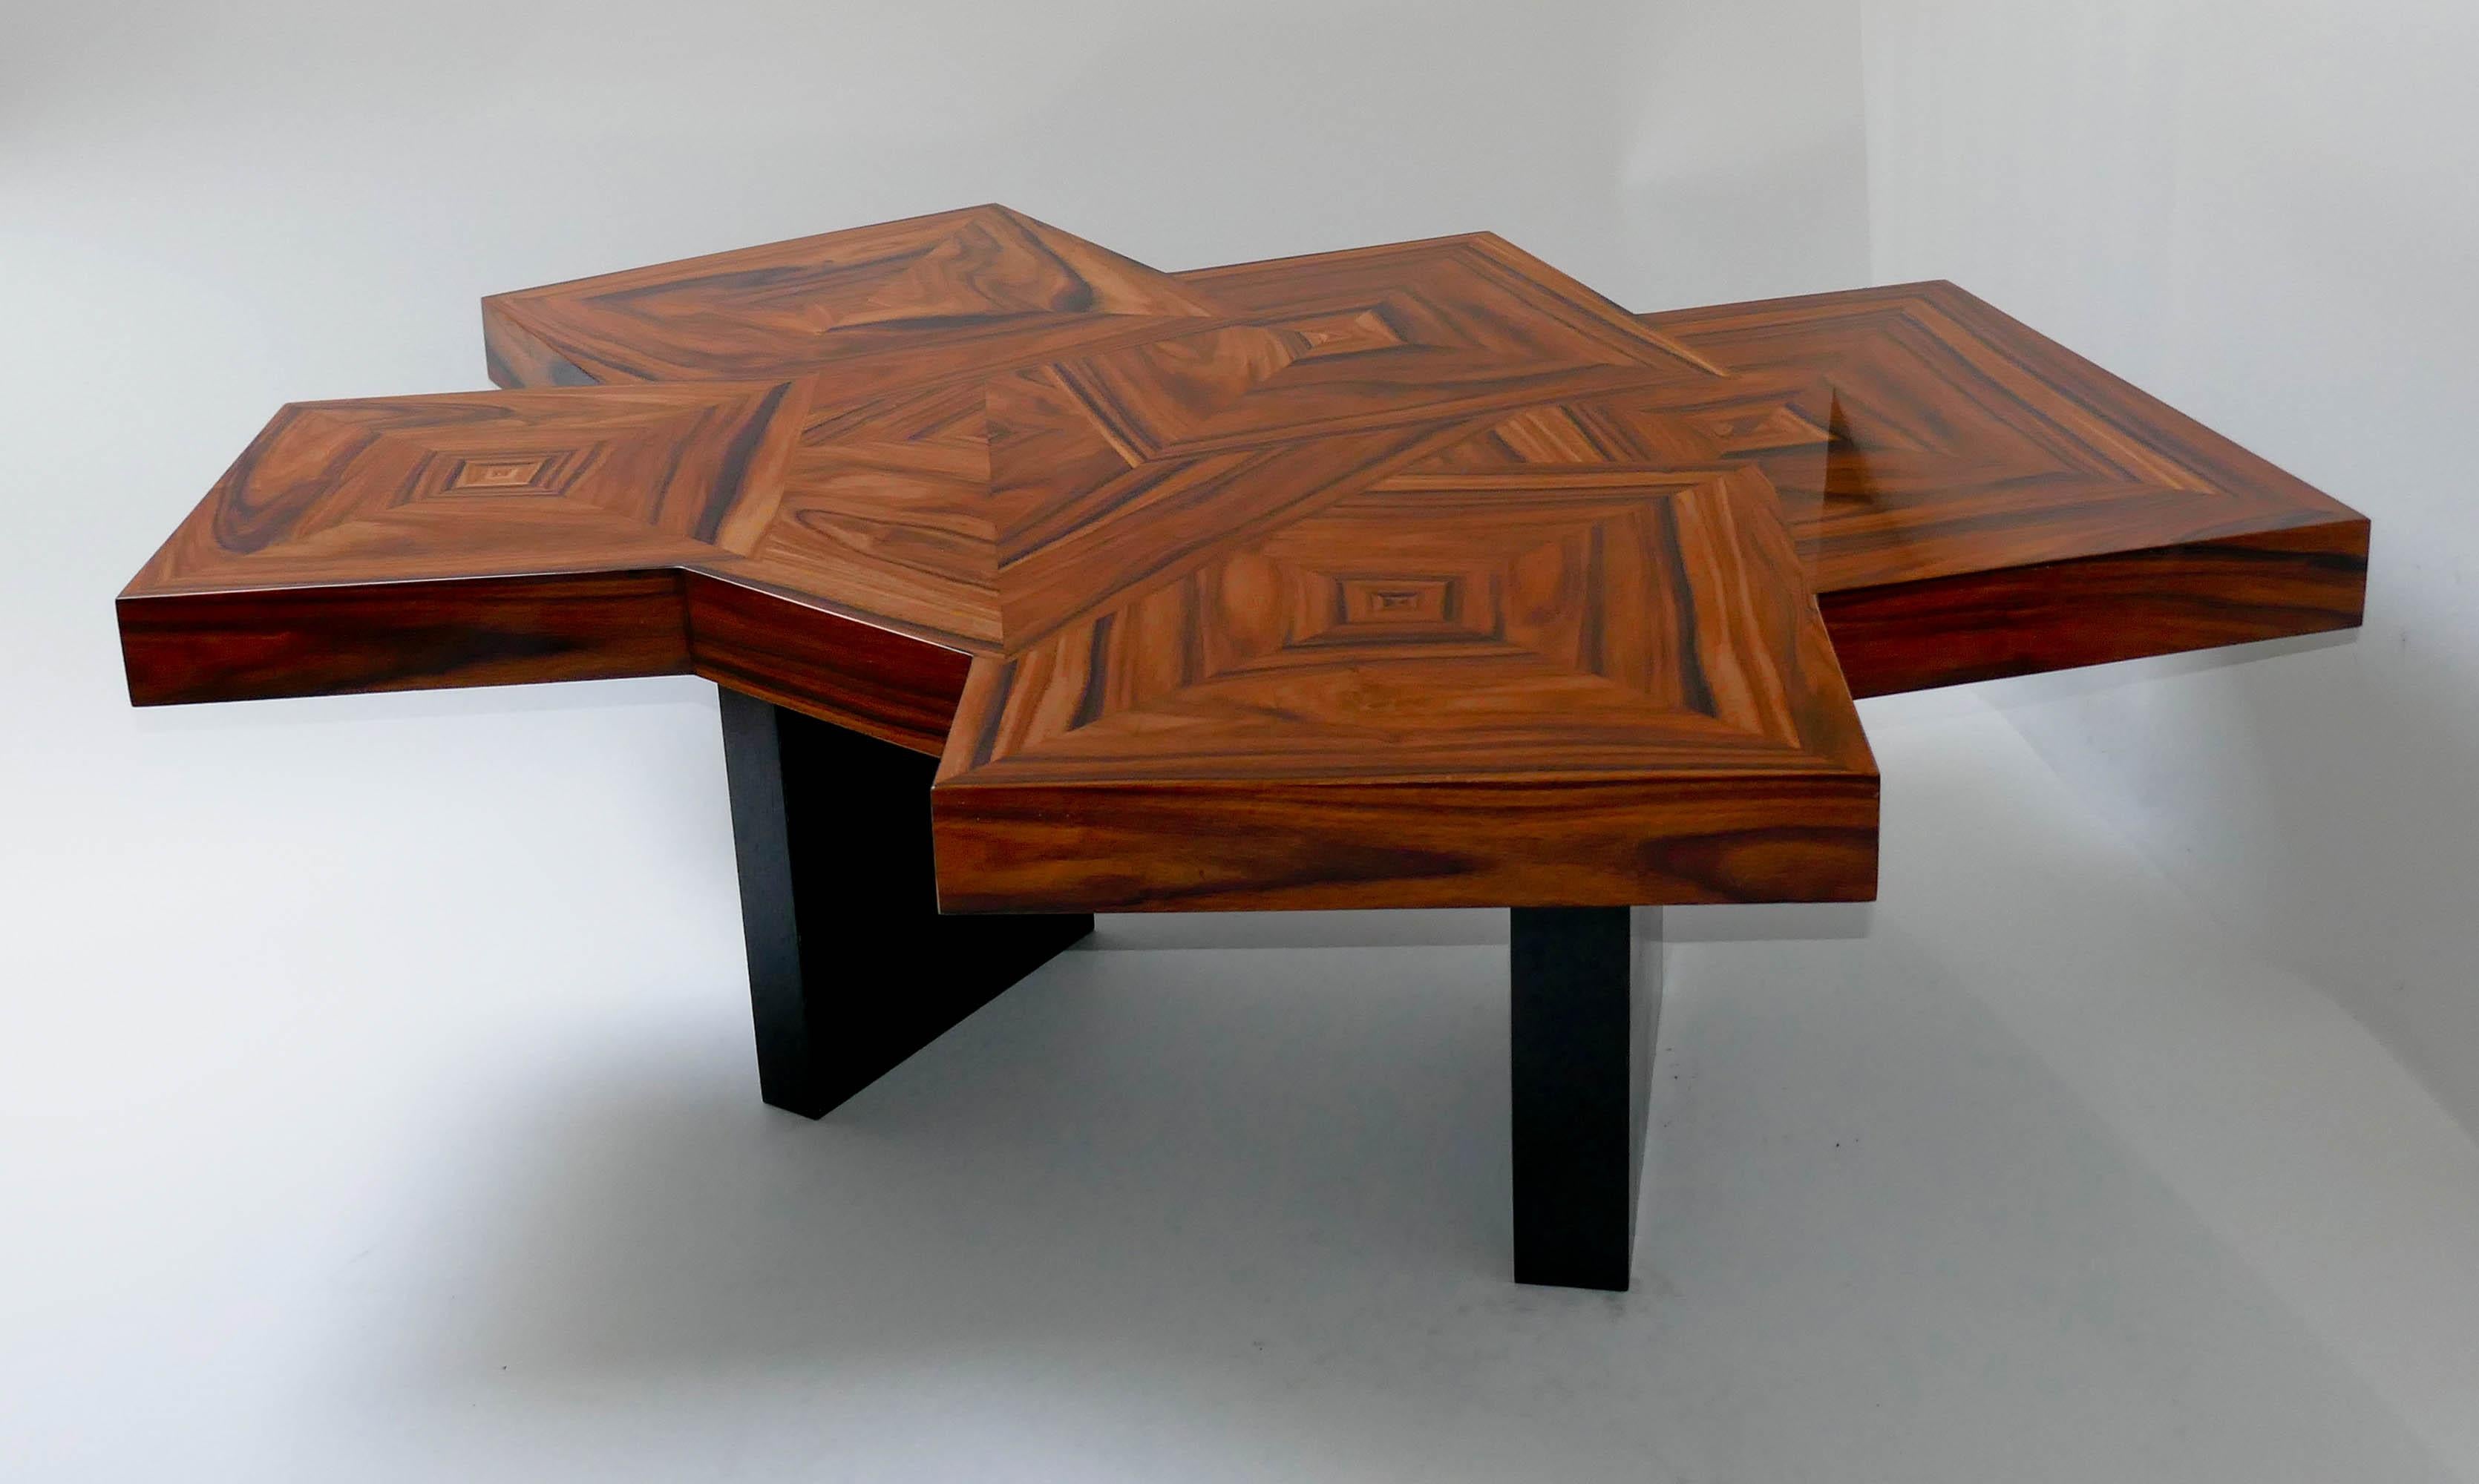 Coffee table in marquetery of Santos wood. The legs are in black tinted oak.
Do not hesitate to ask for a shipping quote to get the best offer.